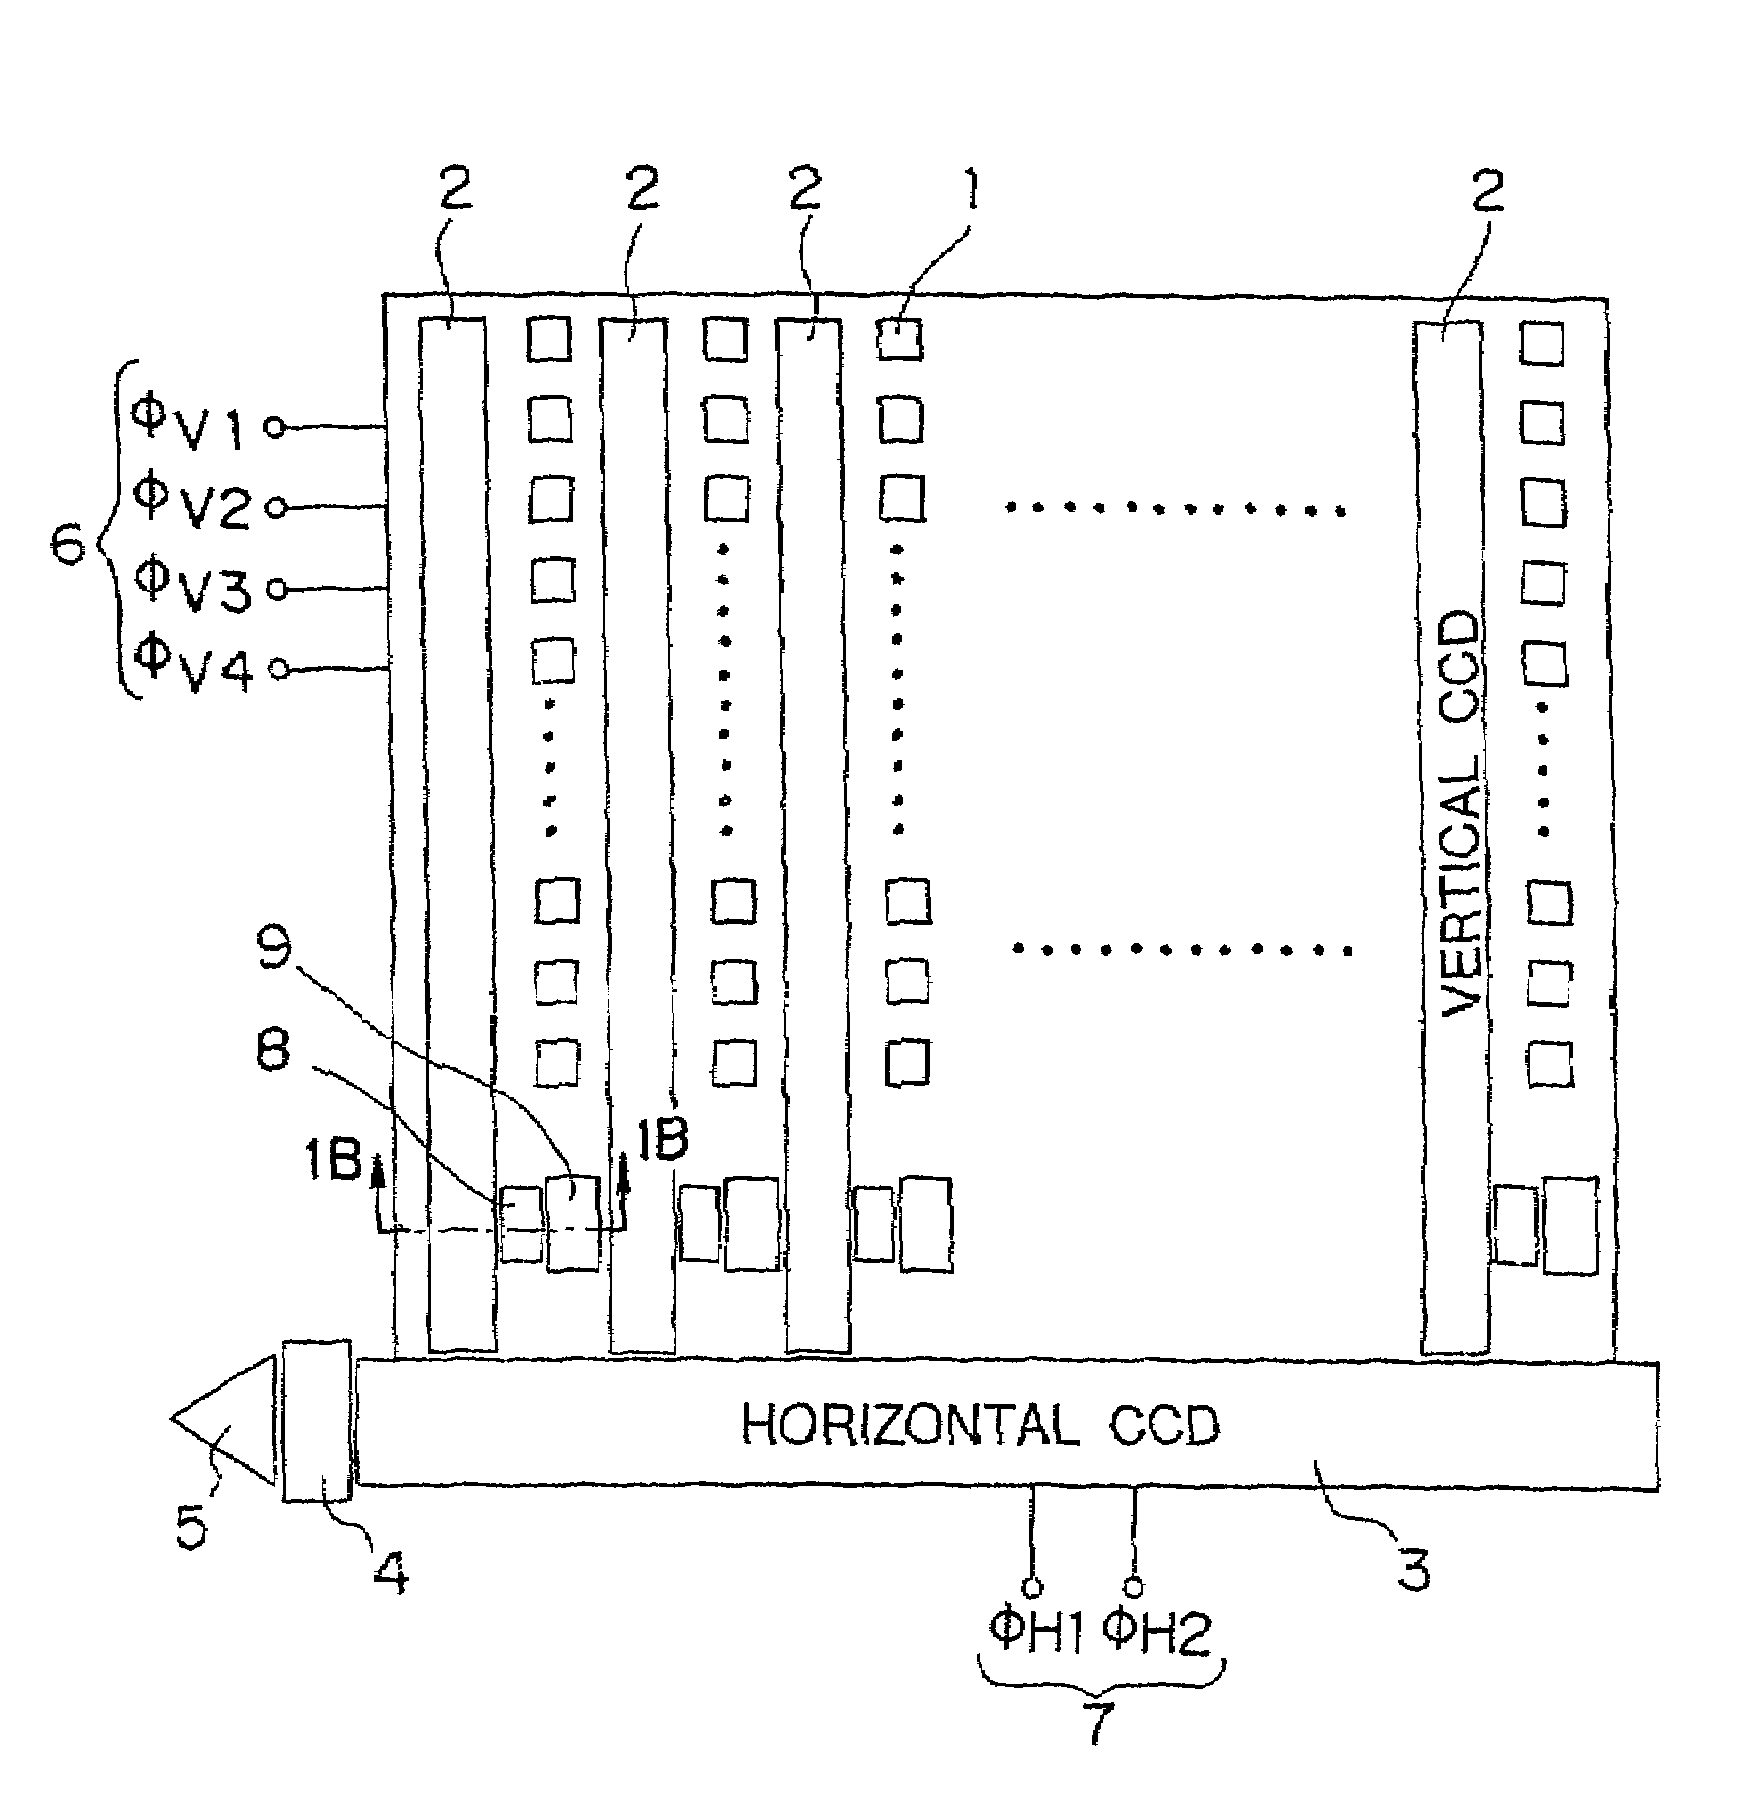 Solid-state image pickup device with discharge gate operable in an arbitrary timing